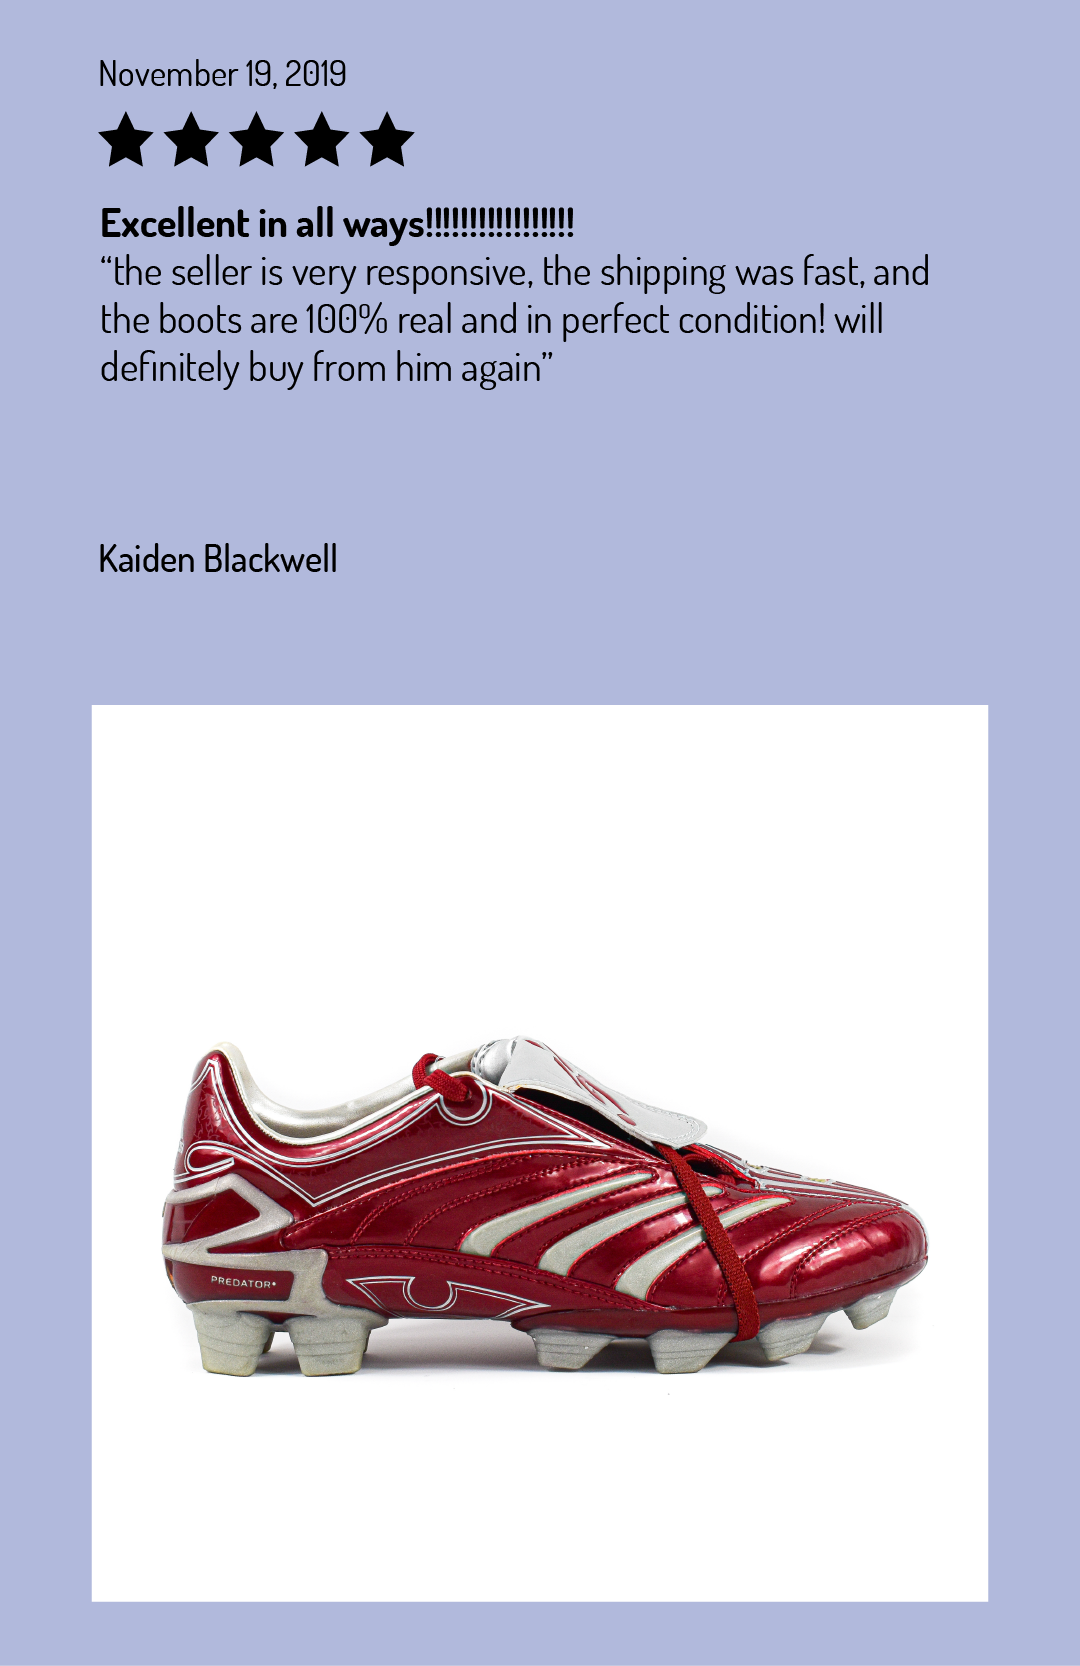 old football boots website